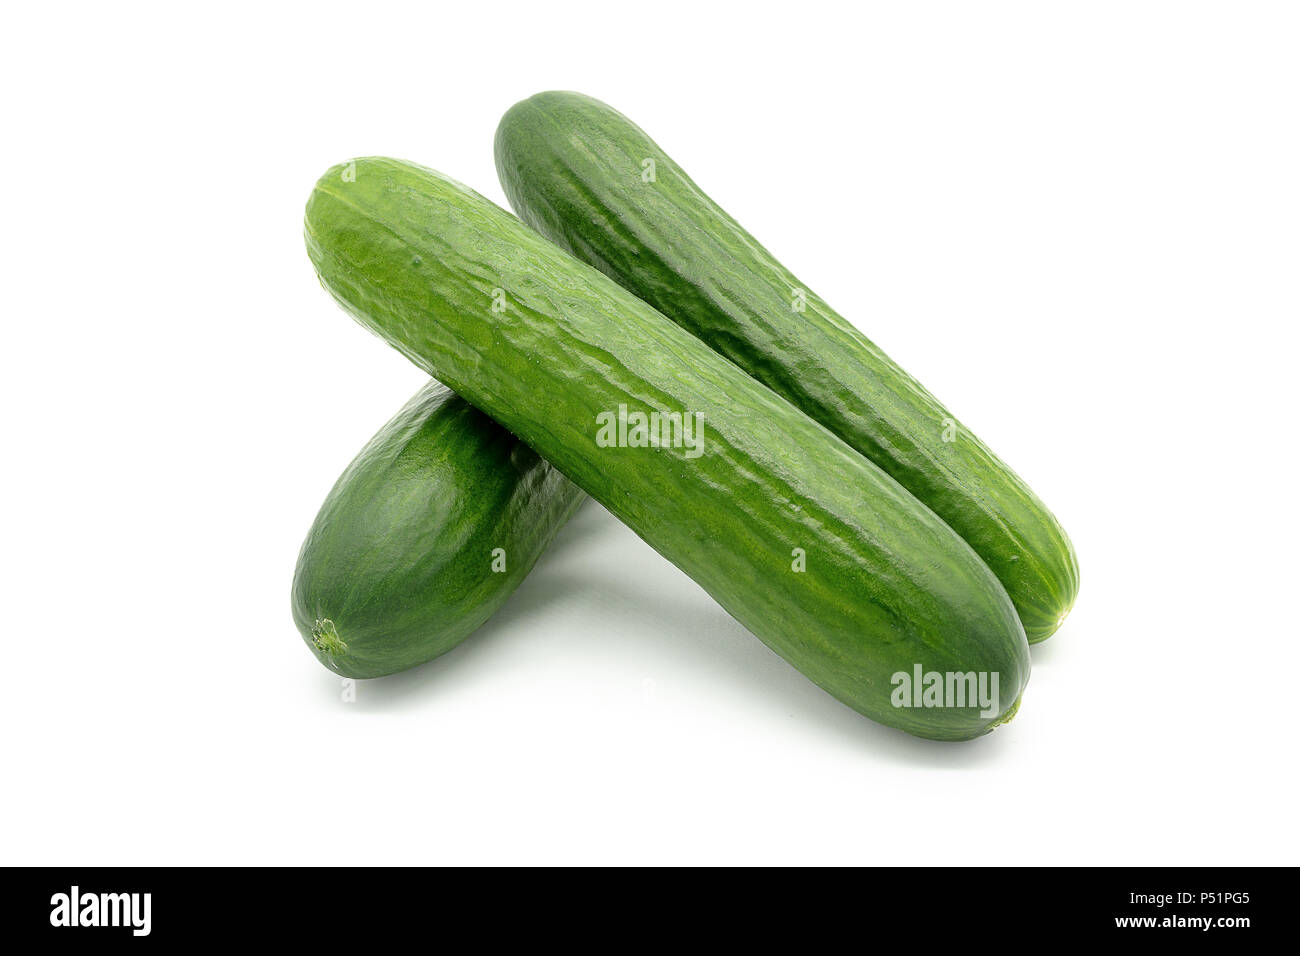 three cucumbers on a white background Stock Photo